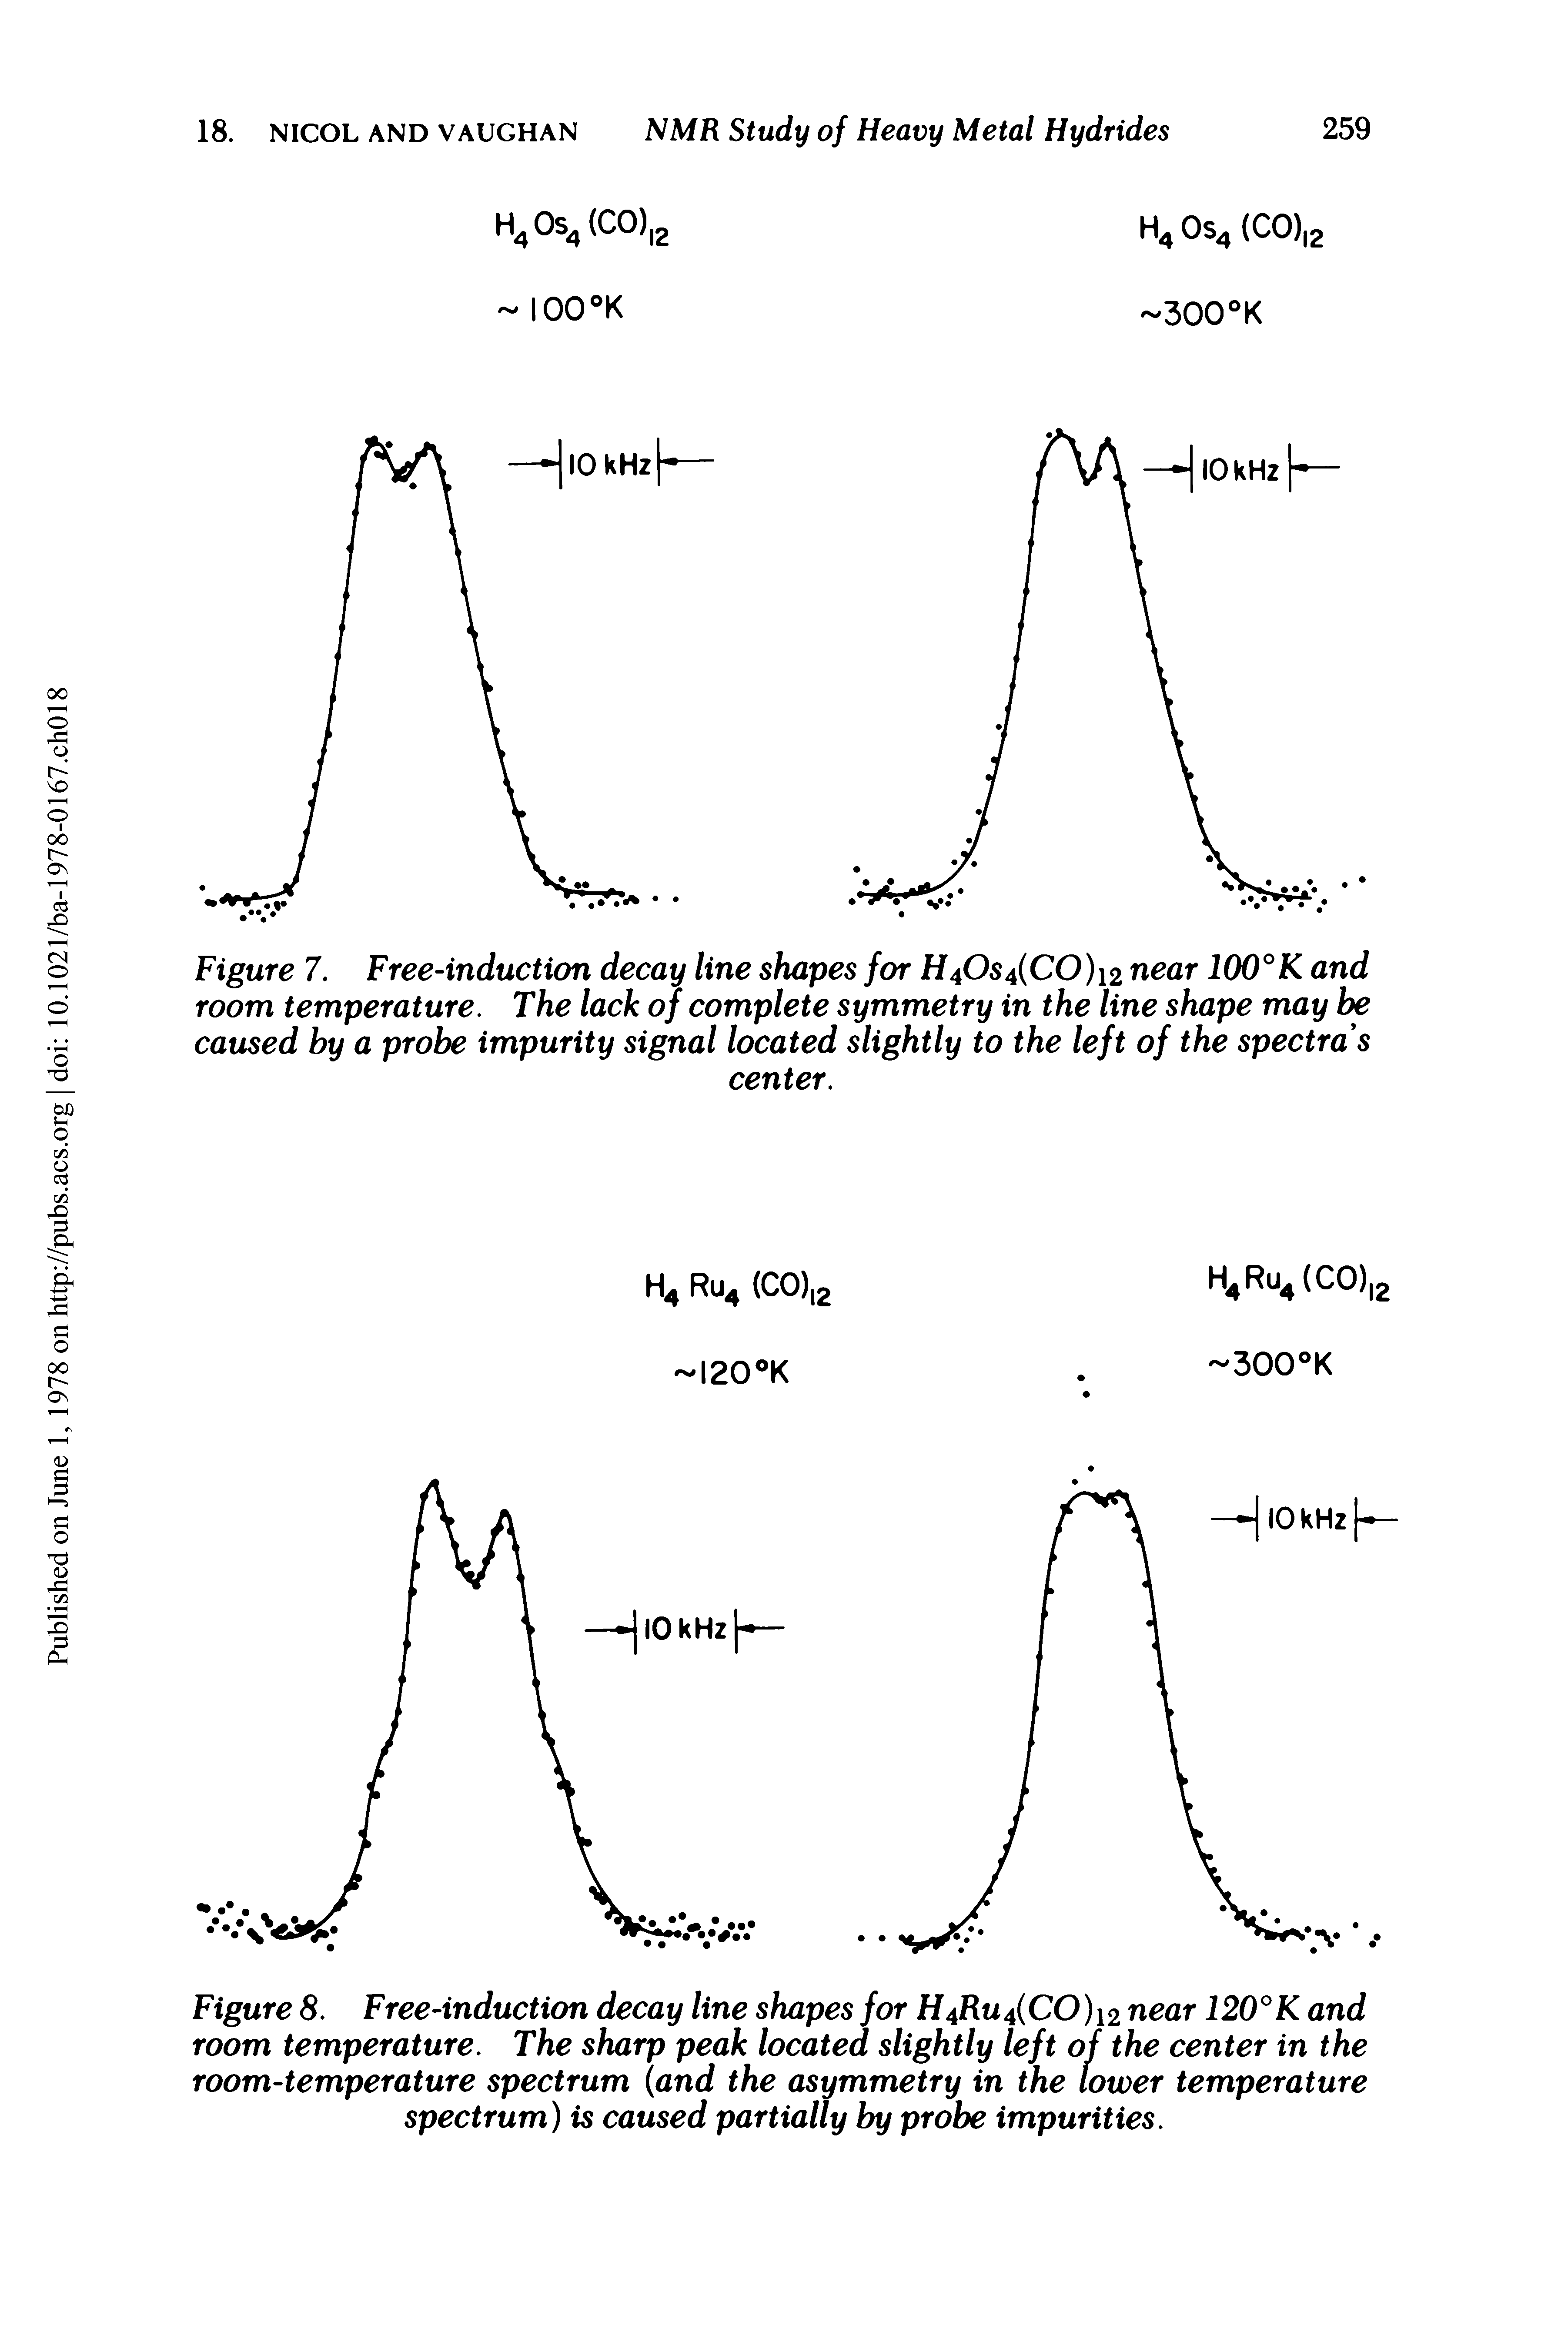 Figure 8. Free-induction decay line shapes for H4Ru4(CO)i2 near 120°K and room temperature. The sharp peak located slightly left of the center in the room-temperature spectrum (and the asymmetry in the lower temperature spectrum) is caused partially by probe impurities.